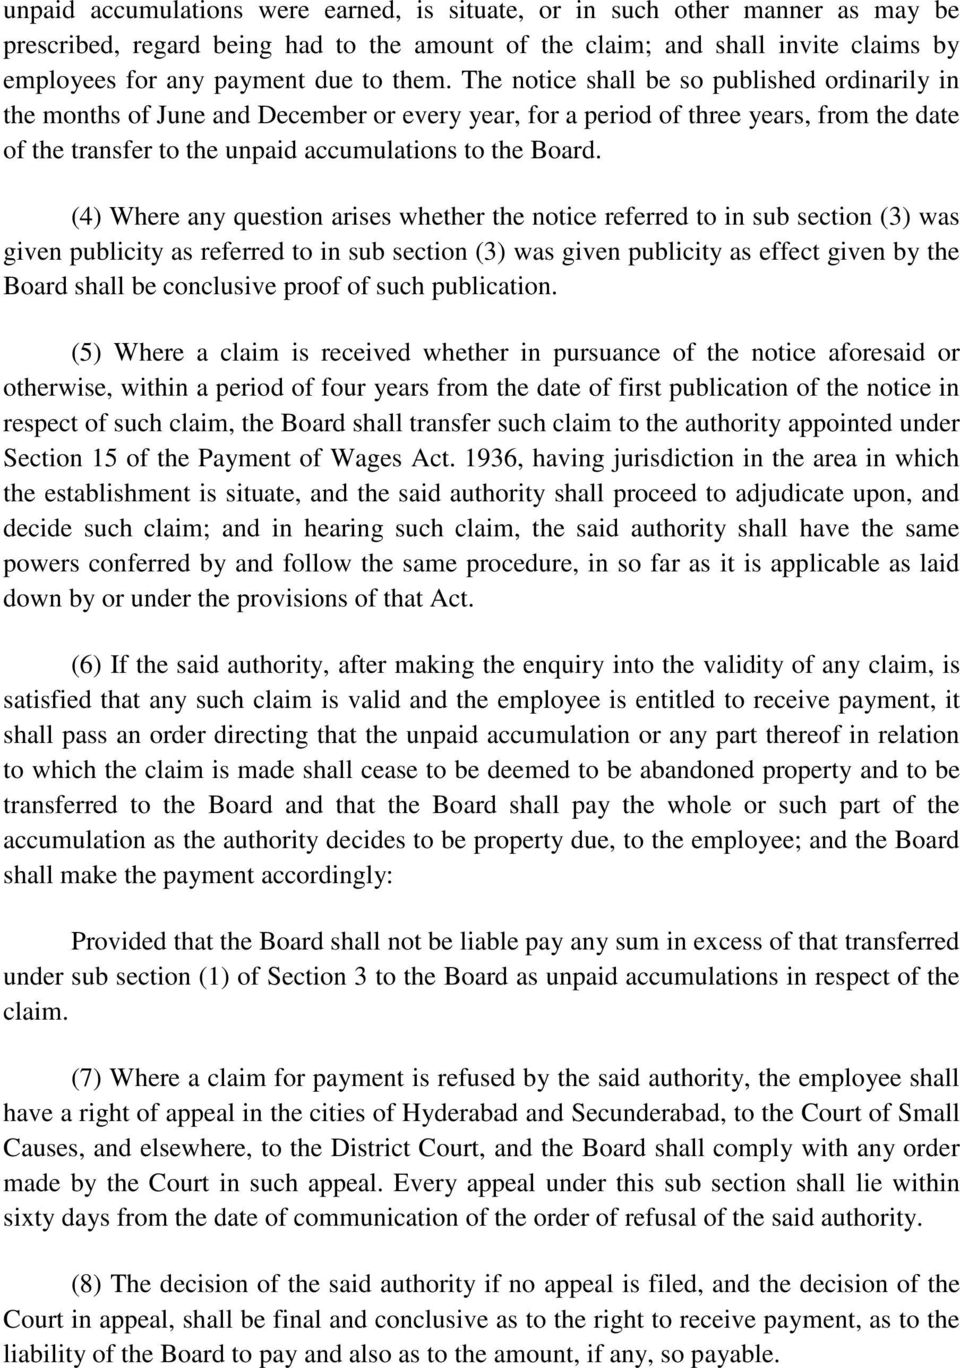 (4) Where any question arises whether the notice referred to in sub section (3) was given publicity as referred to in sub section (3) was given publicity as effect given by the Board shall be